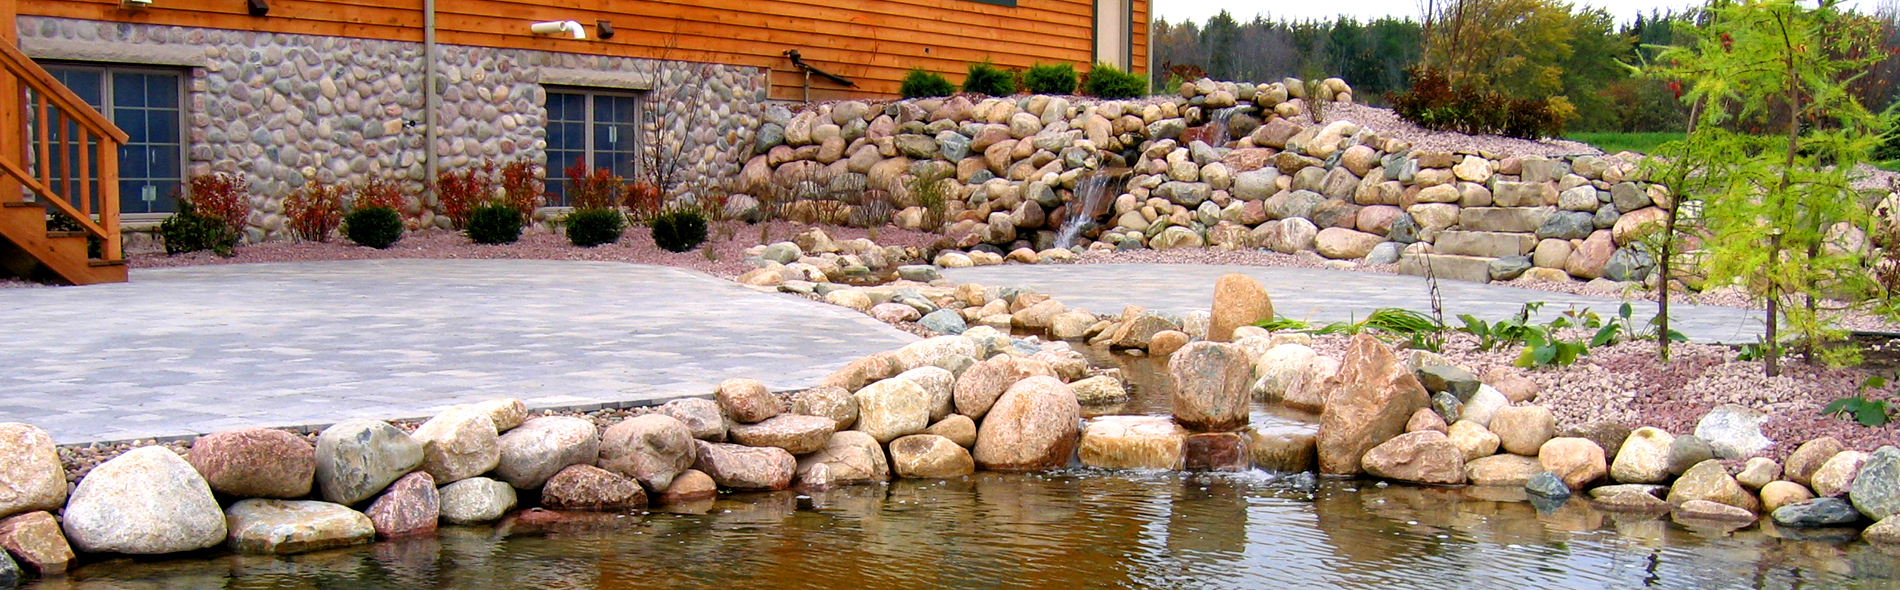 Patio with stream and pond